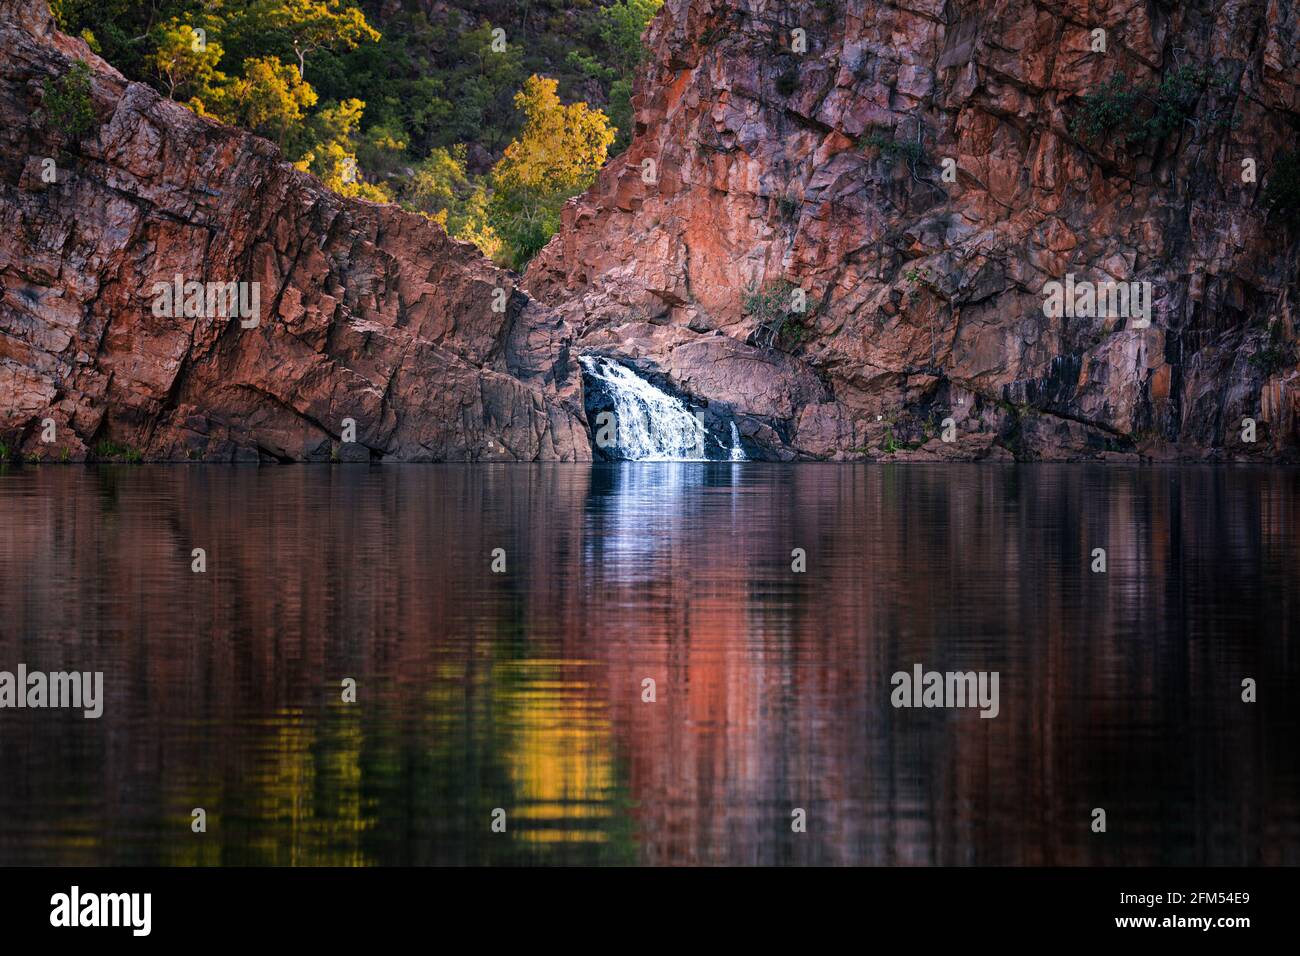 Edith Falls, waterfall, surrounded by lush green trees and red rocks in Nitmiluk National Park, Northern Territoy, Australia Stock Photo